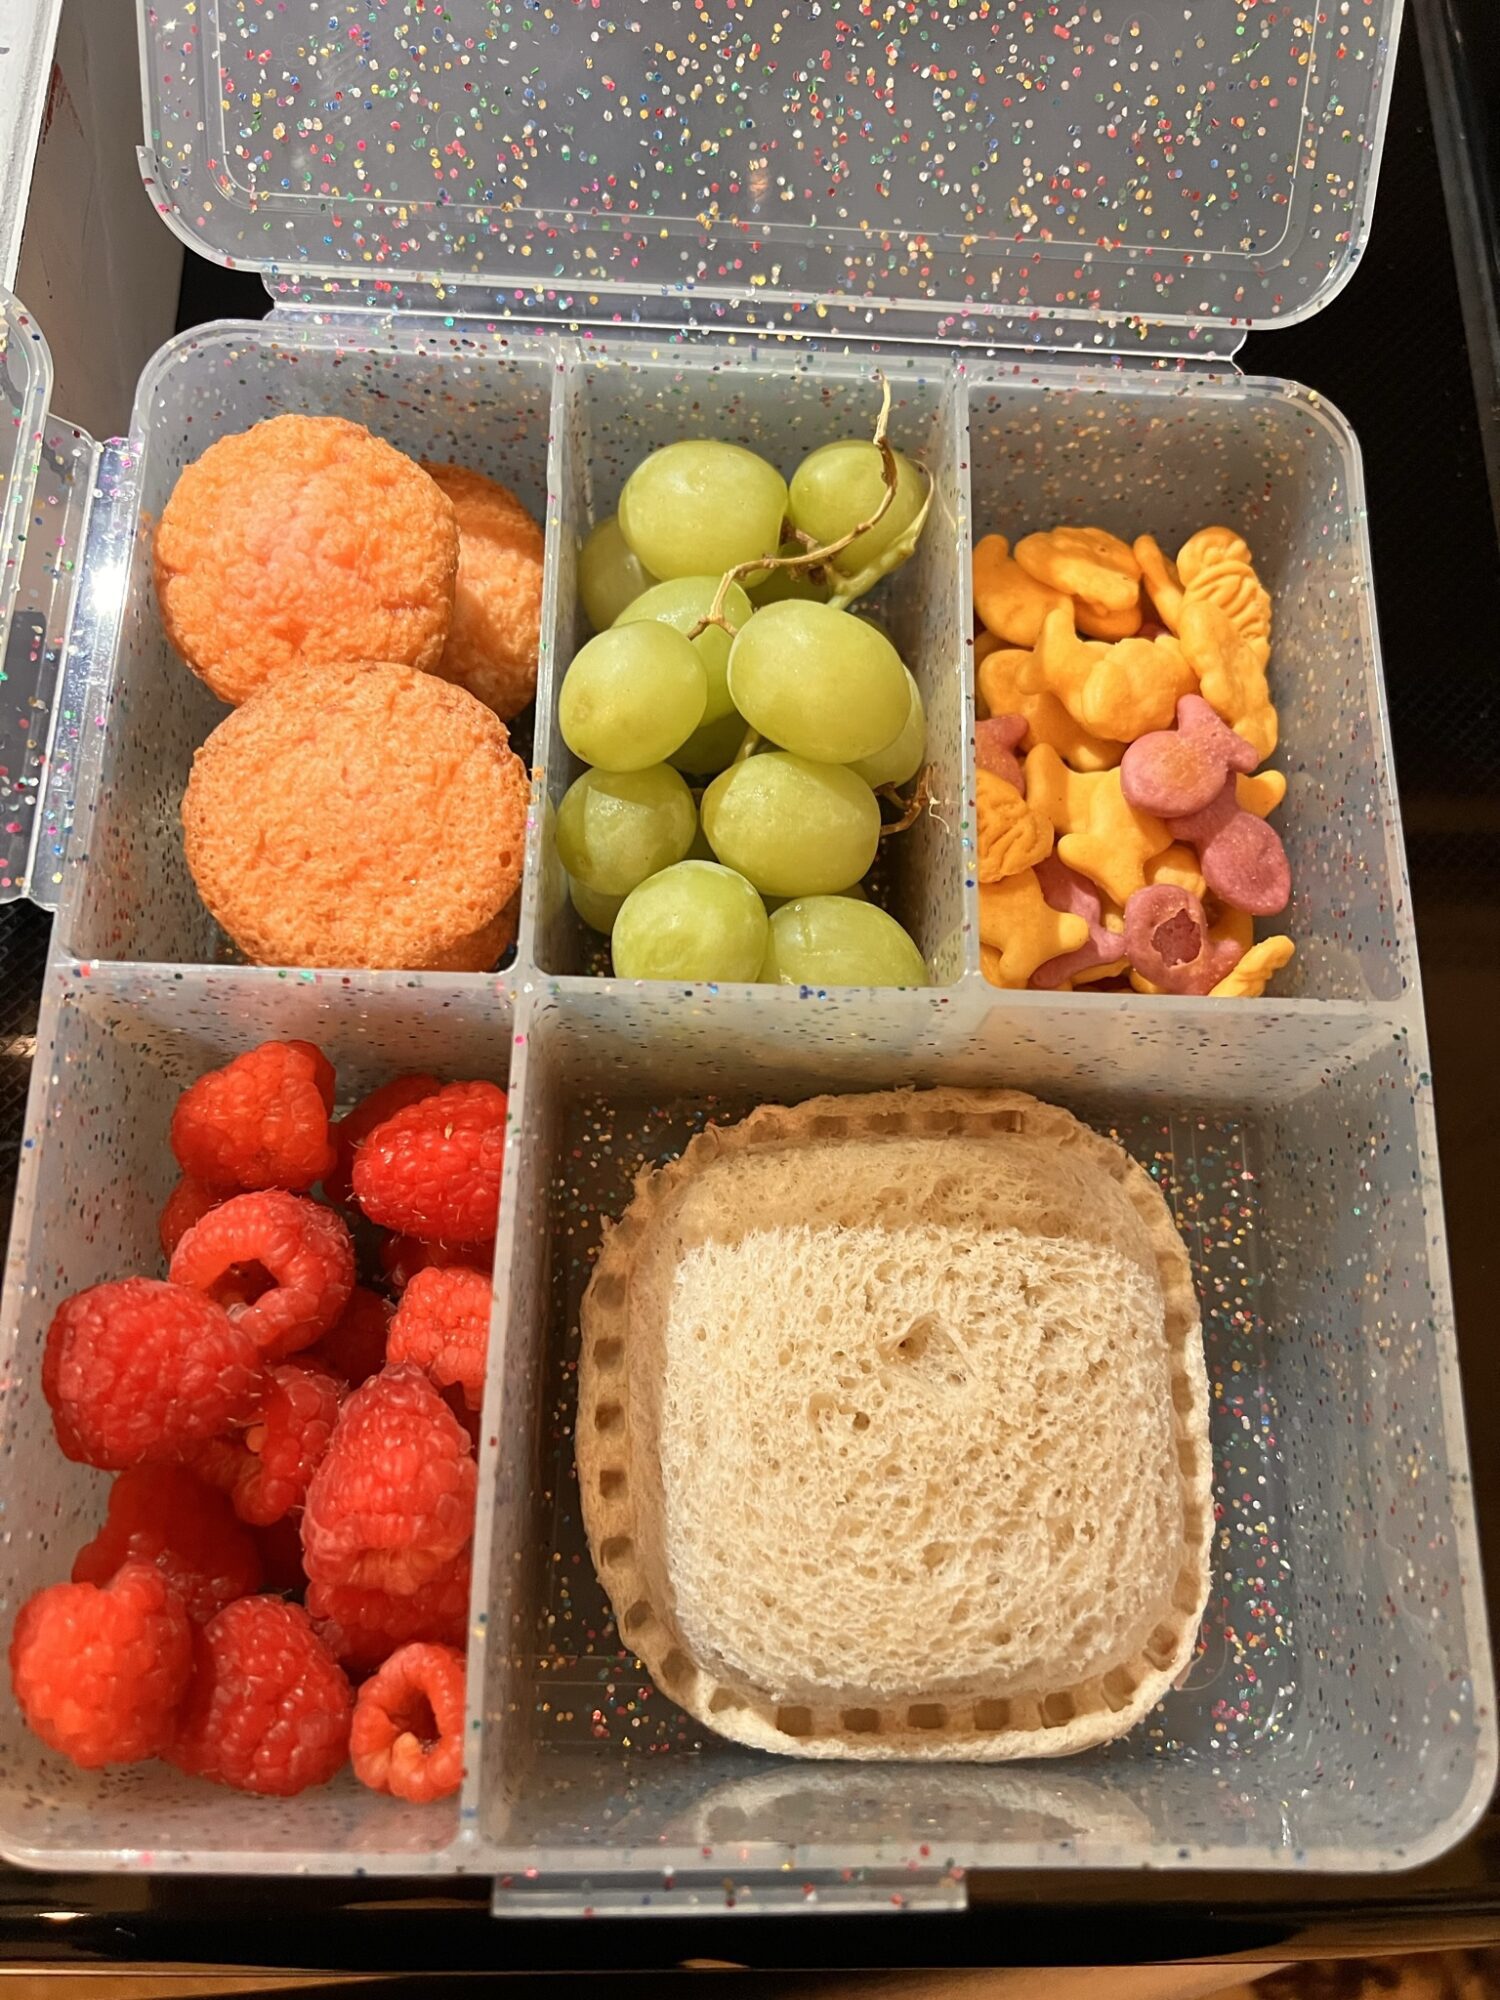 Spring Easter Bento Box Lunch Ideas for Kids Crustless sandwich shapes theme healthy fast easy meal prep lunchbox jokes